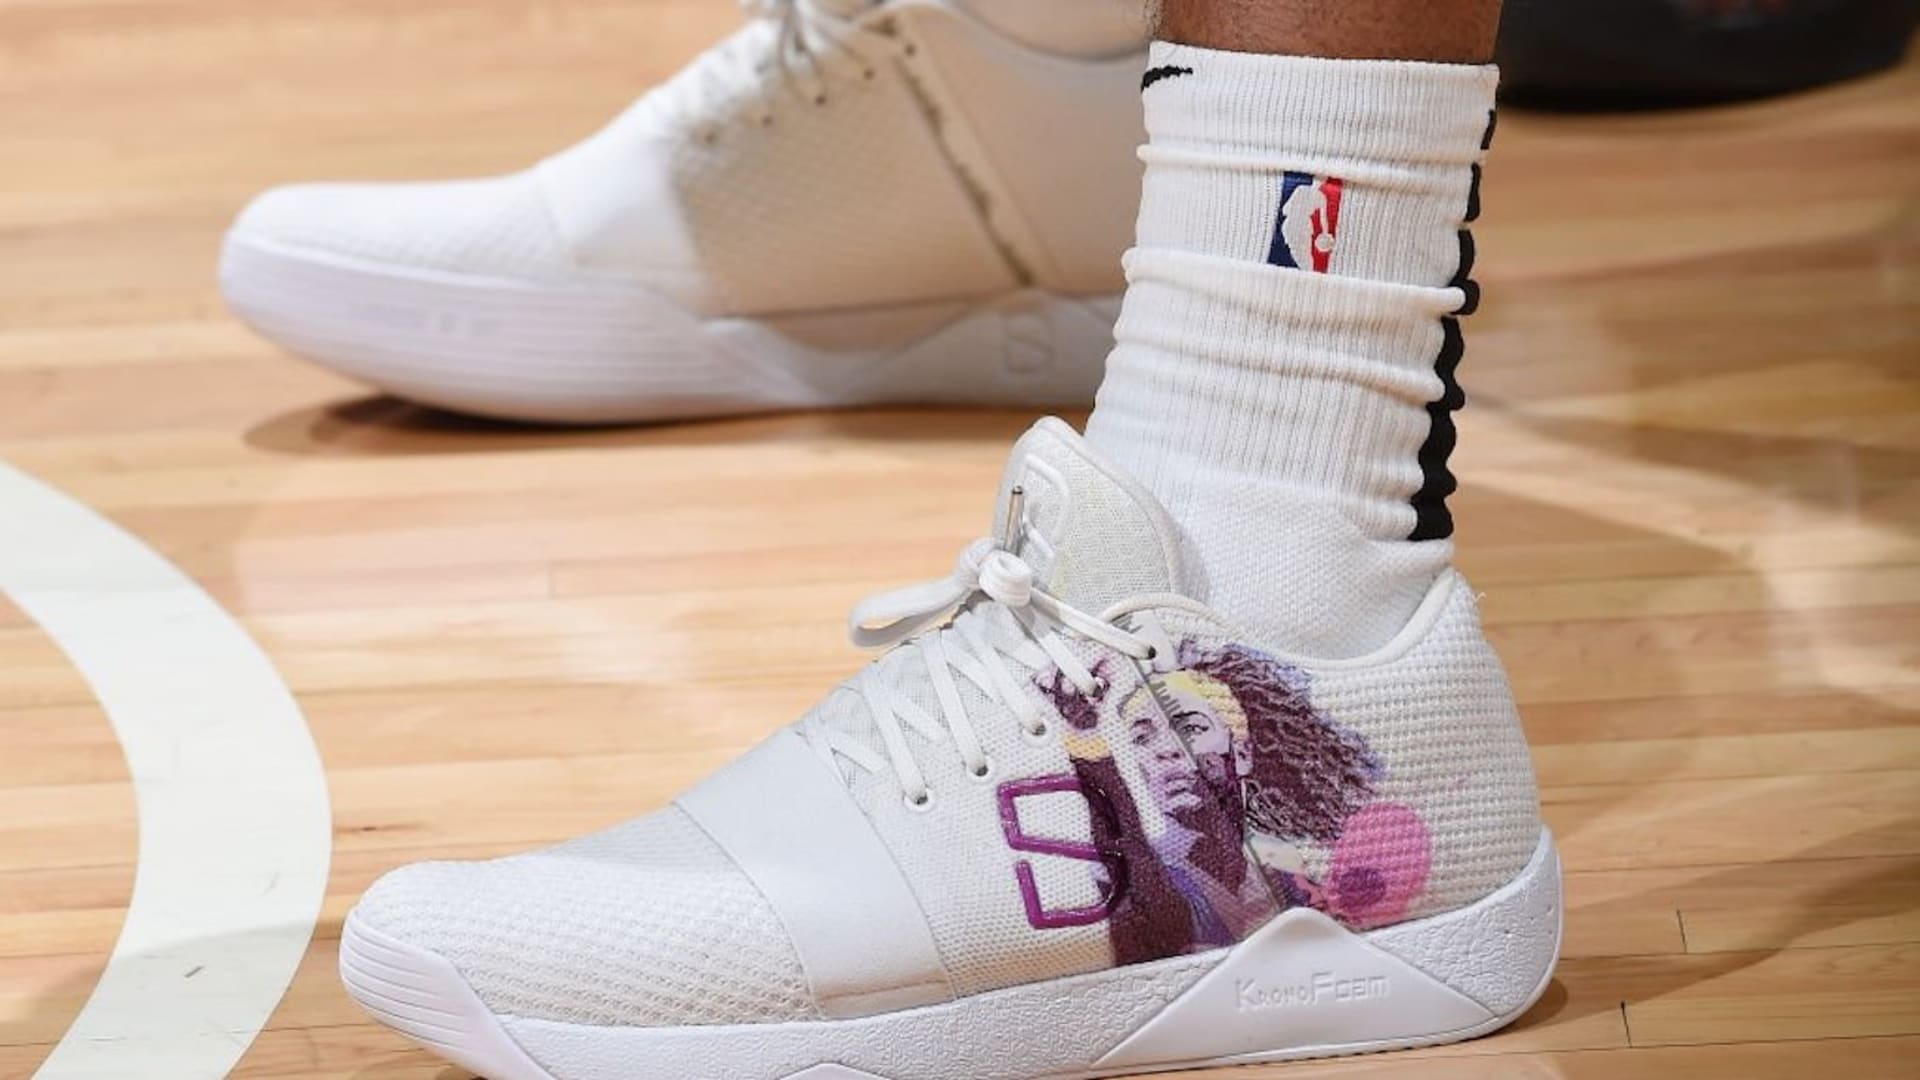 Serena honored with special tribute on NBA sneakers